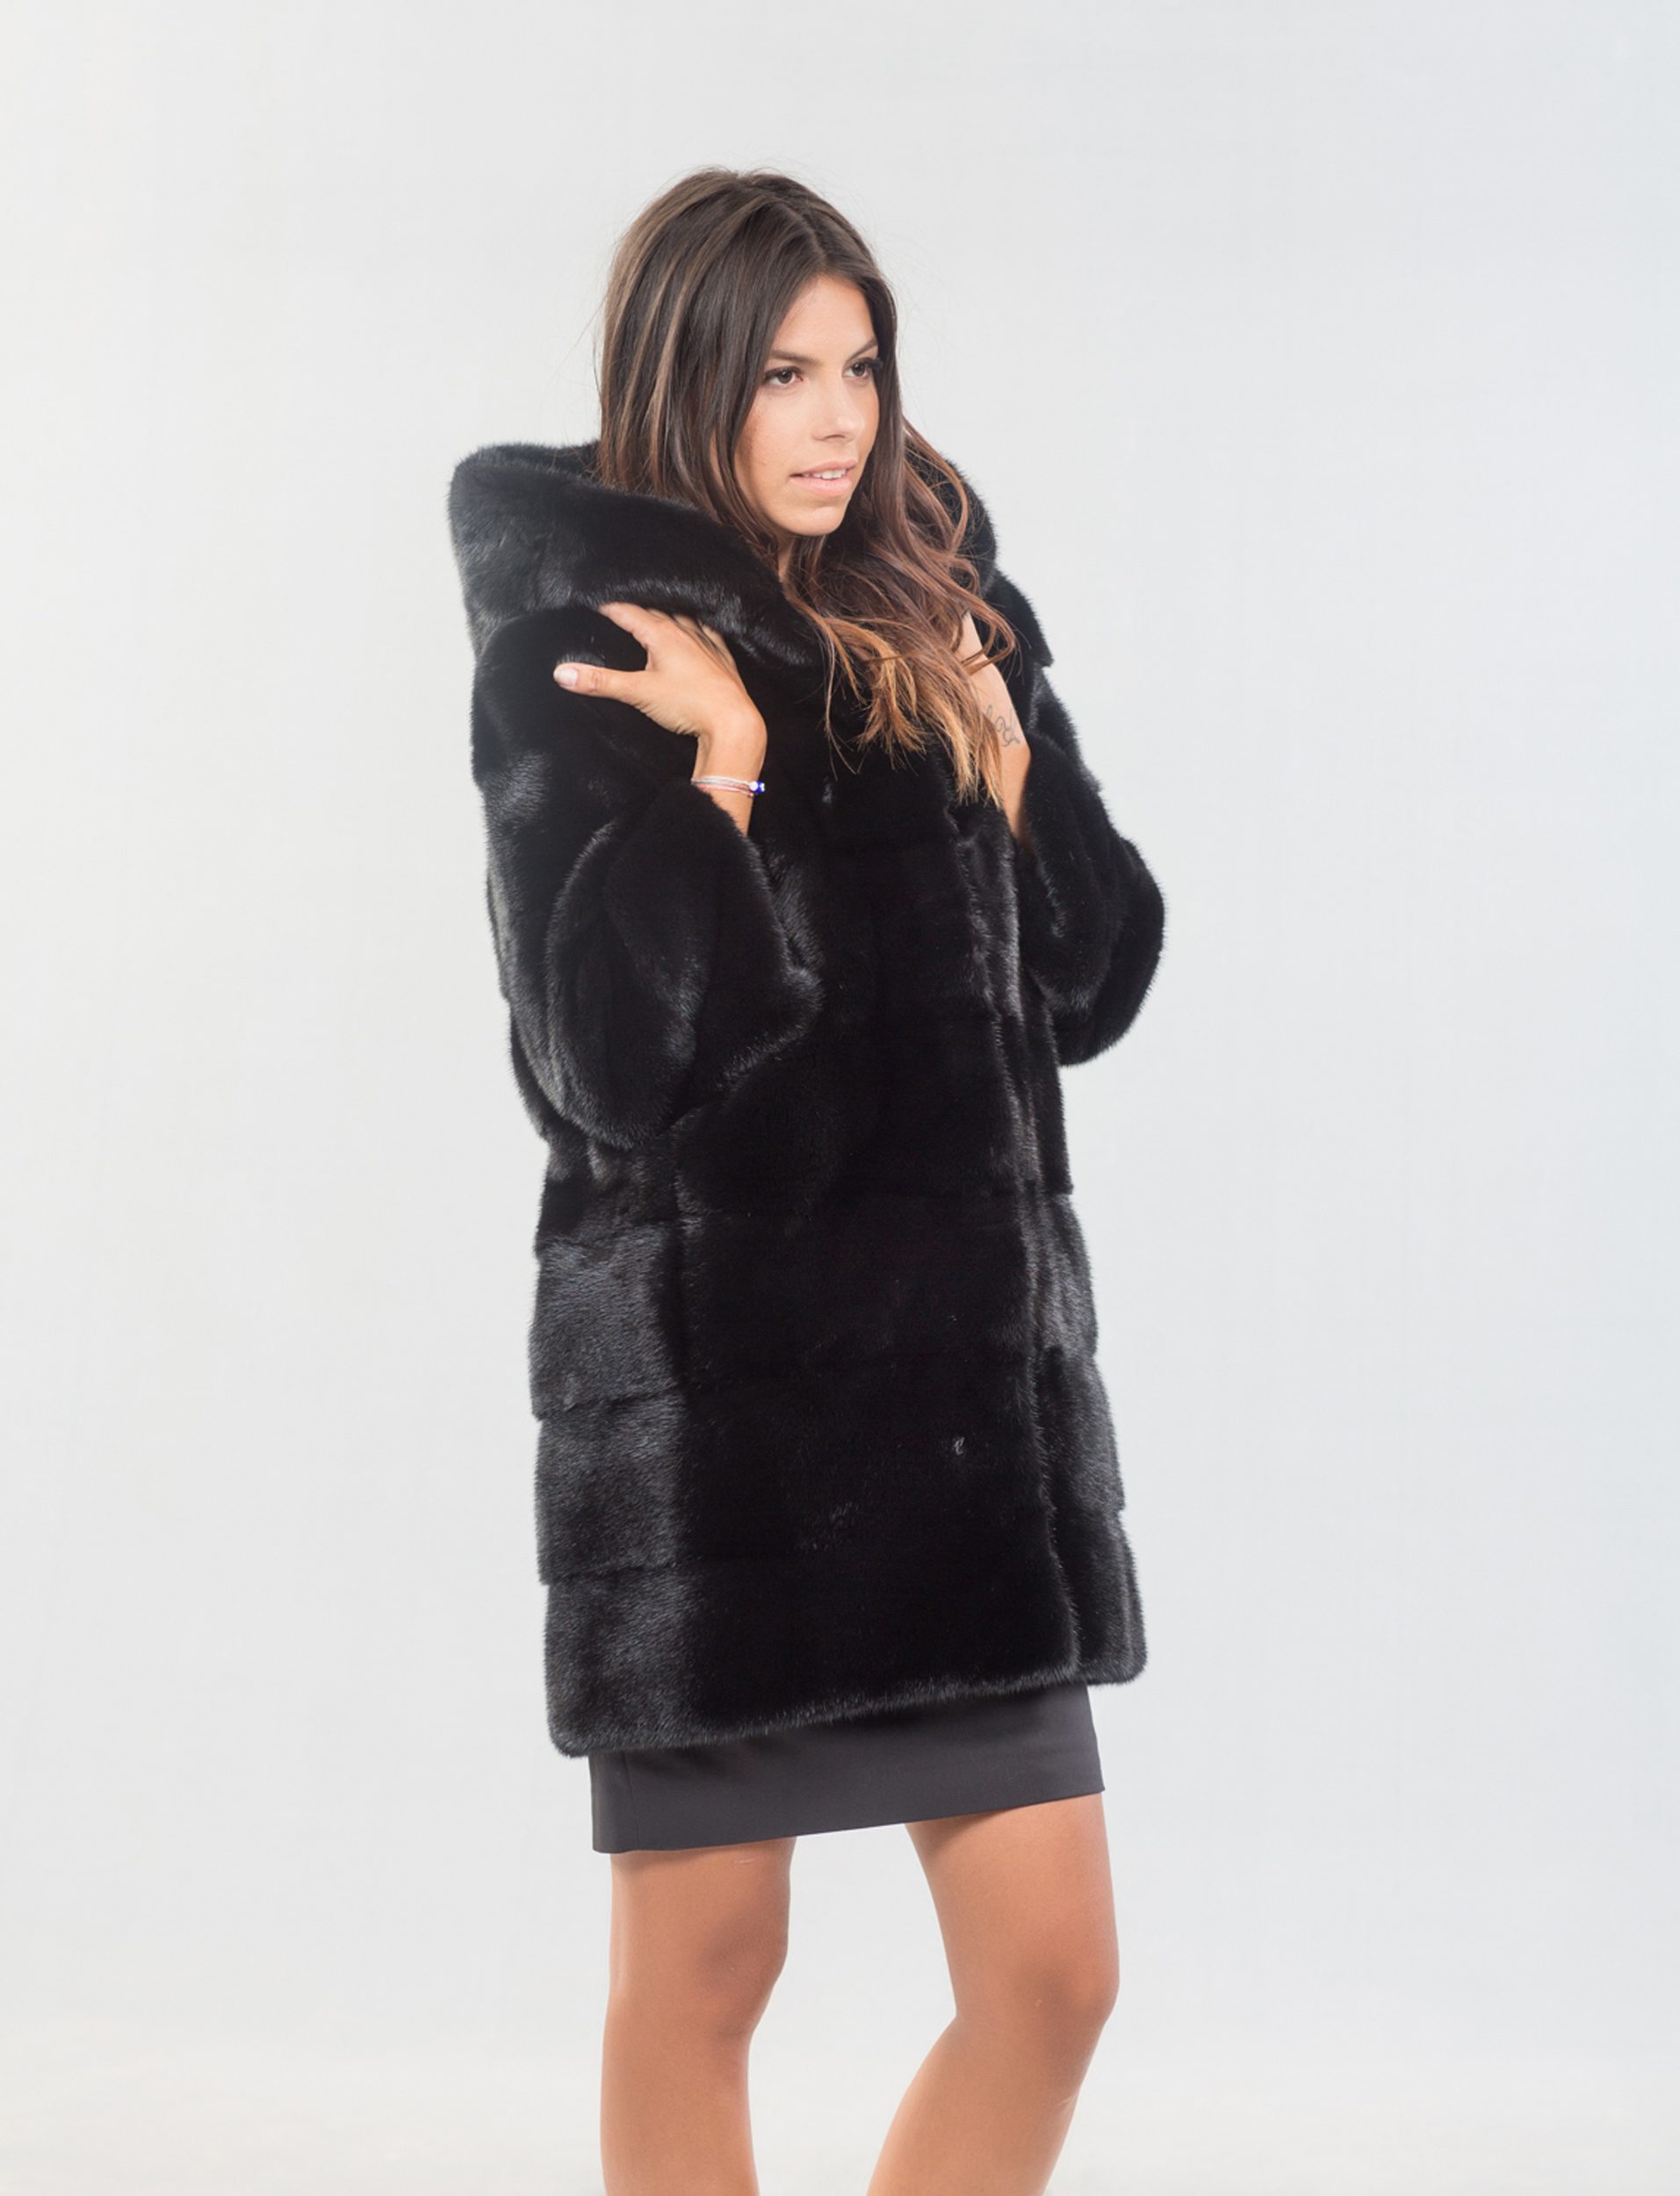 Brawl nærme sig cowboy Black Mink Coat With Hood. 100% Real Fur Coats and Accessories.